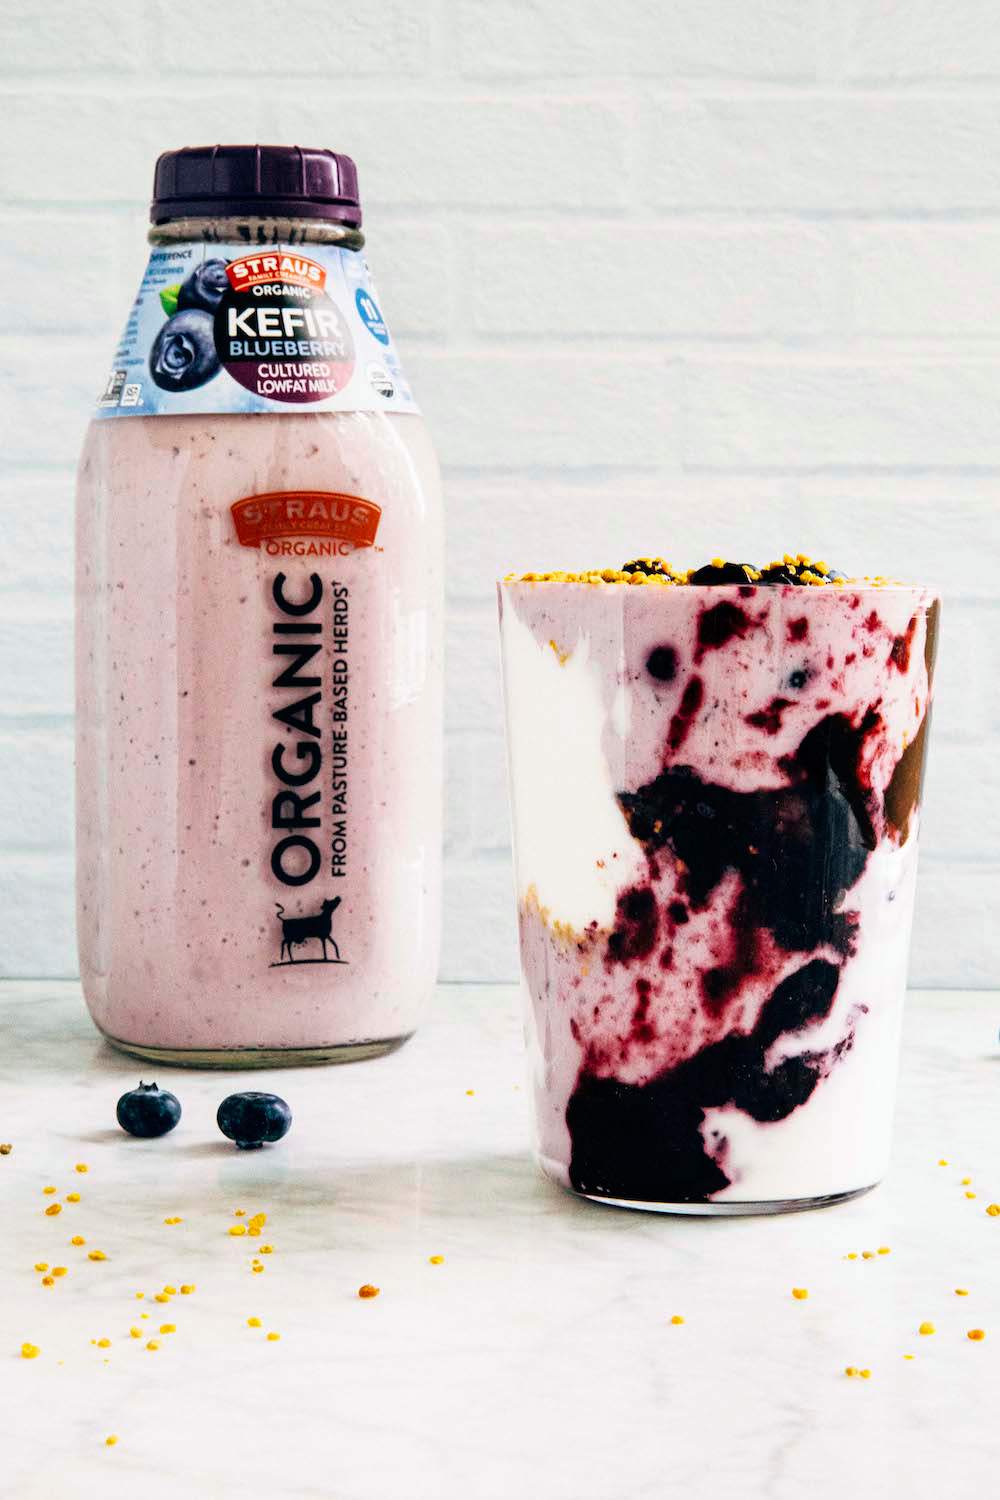 blended Blueberry Coconut Kefir Smoothie smoothie in a glass next to straus organic blueberry kefir